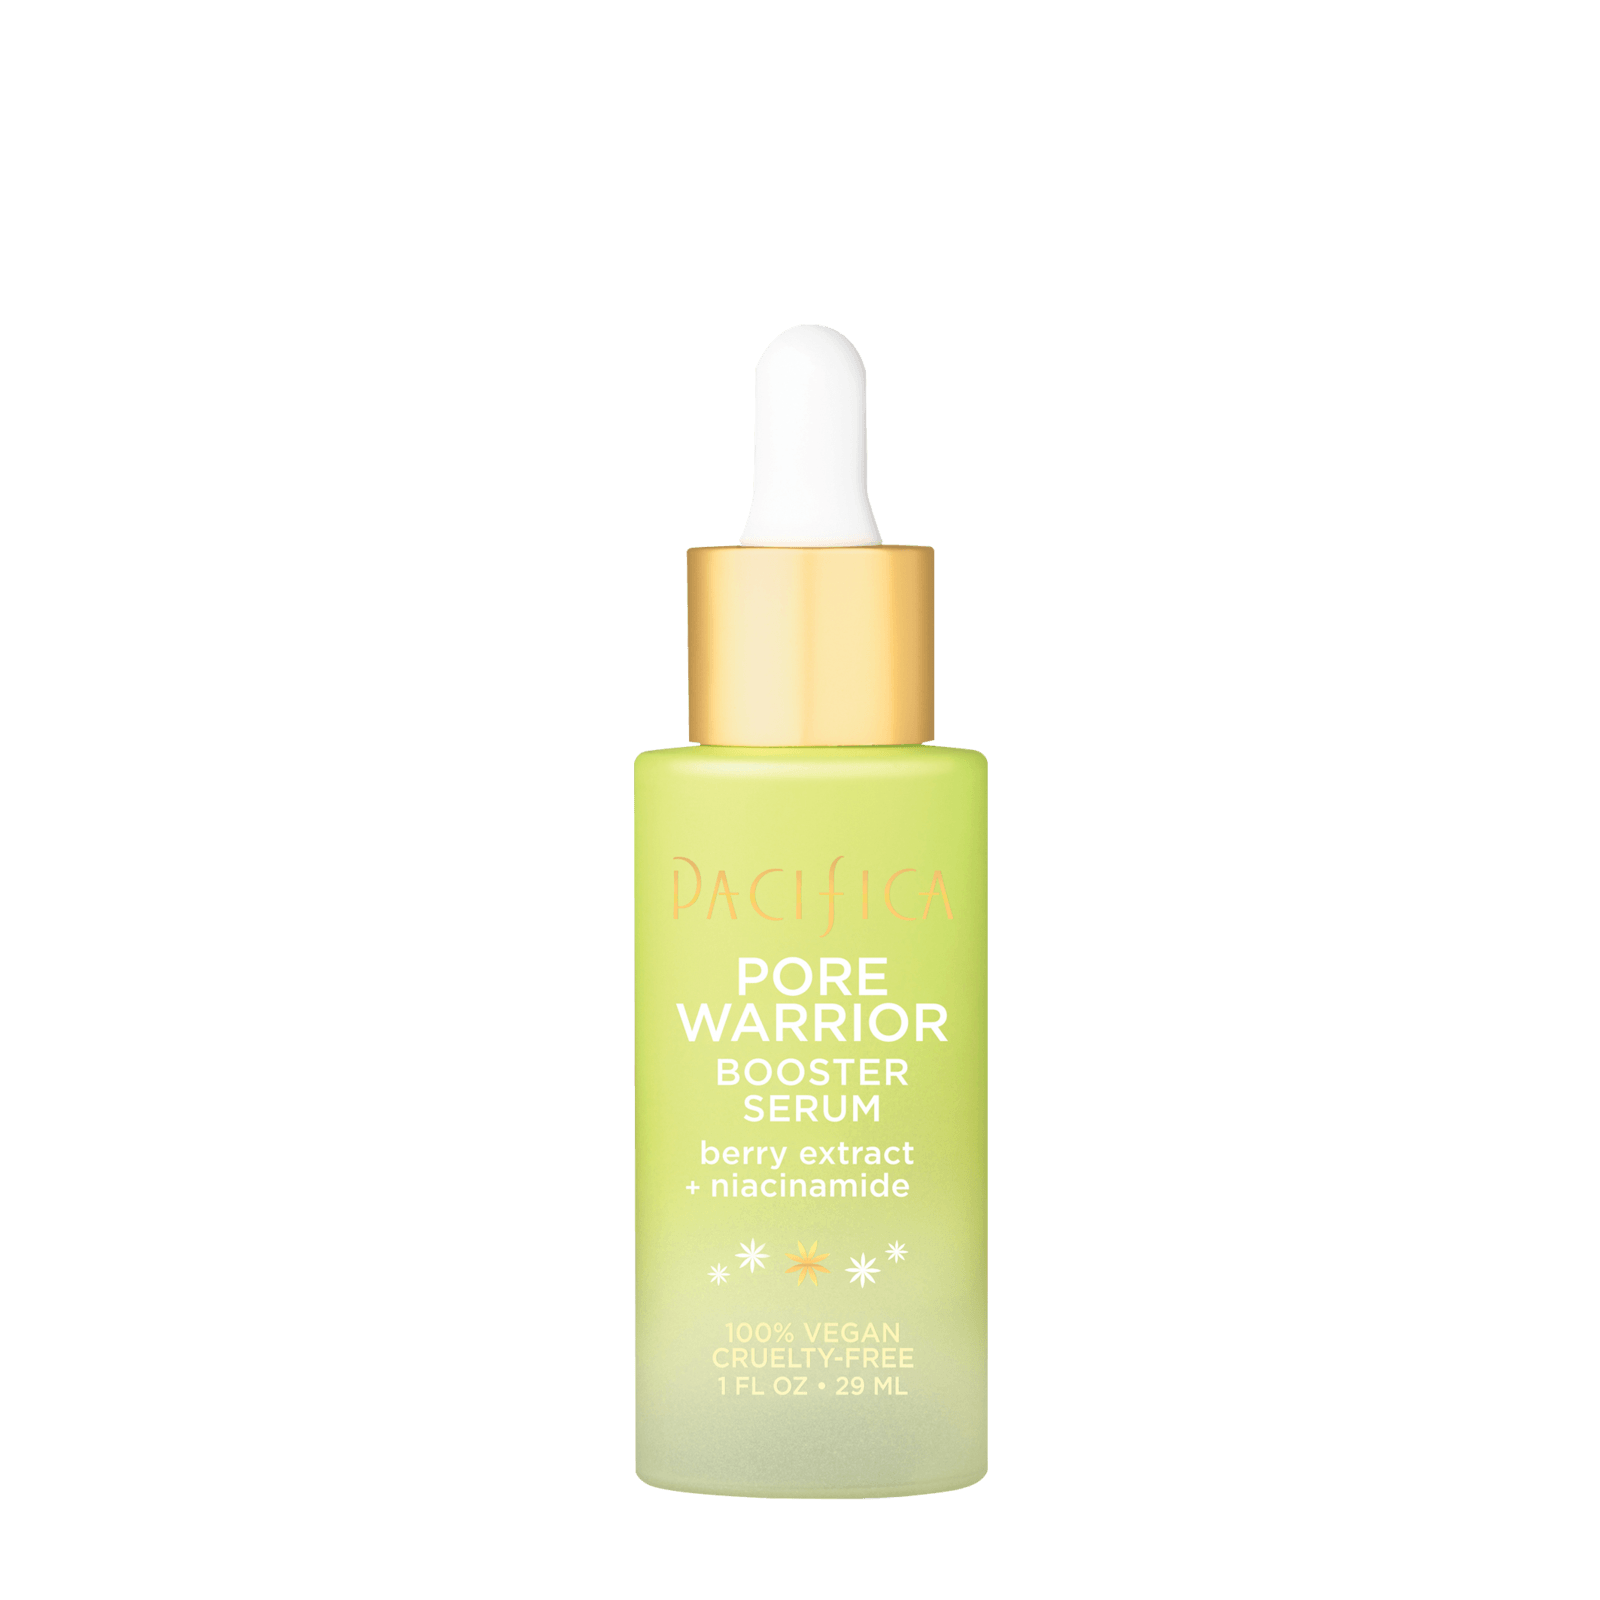 Pacifica® Beauty Pore Warrior Oil Fighter Booster Serum at Socialite Beauty Canada